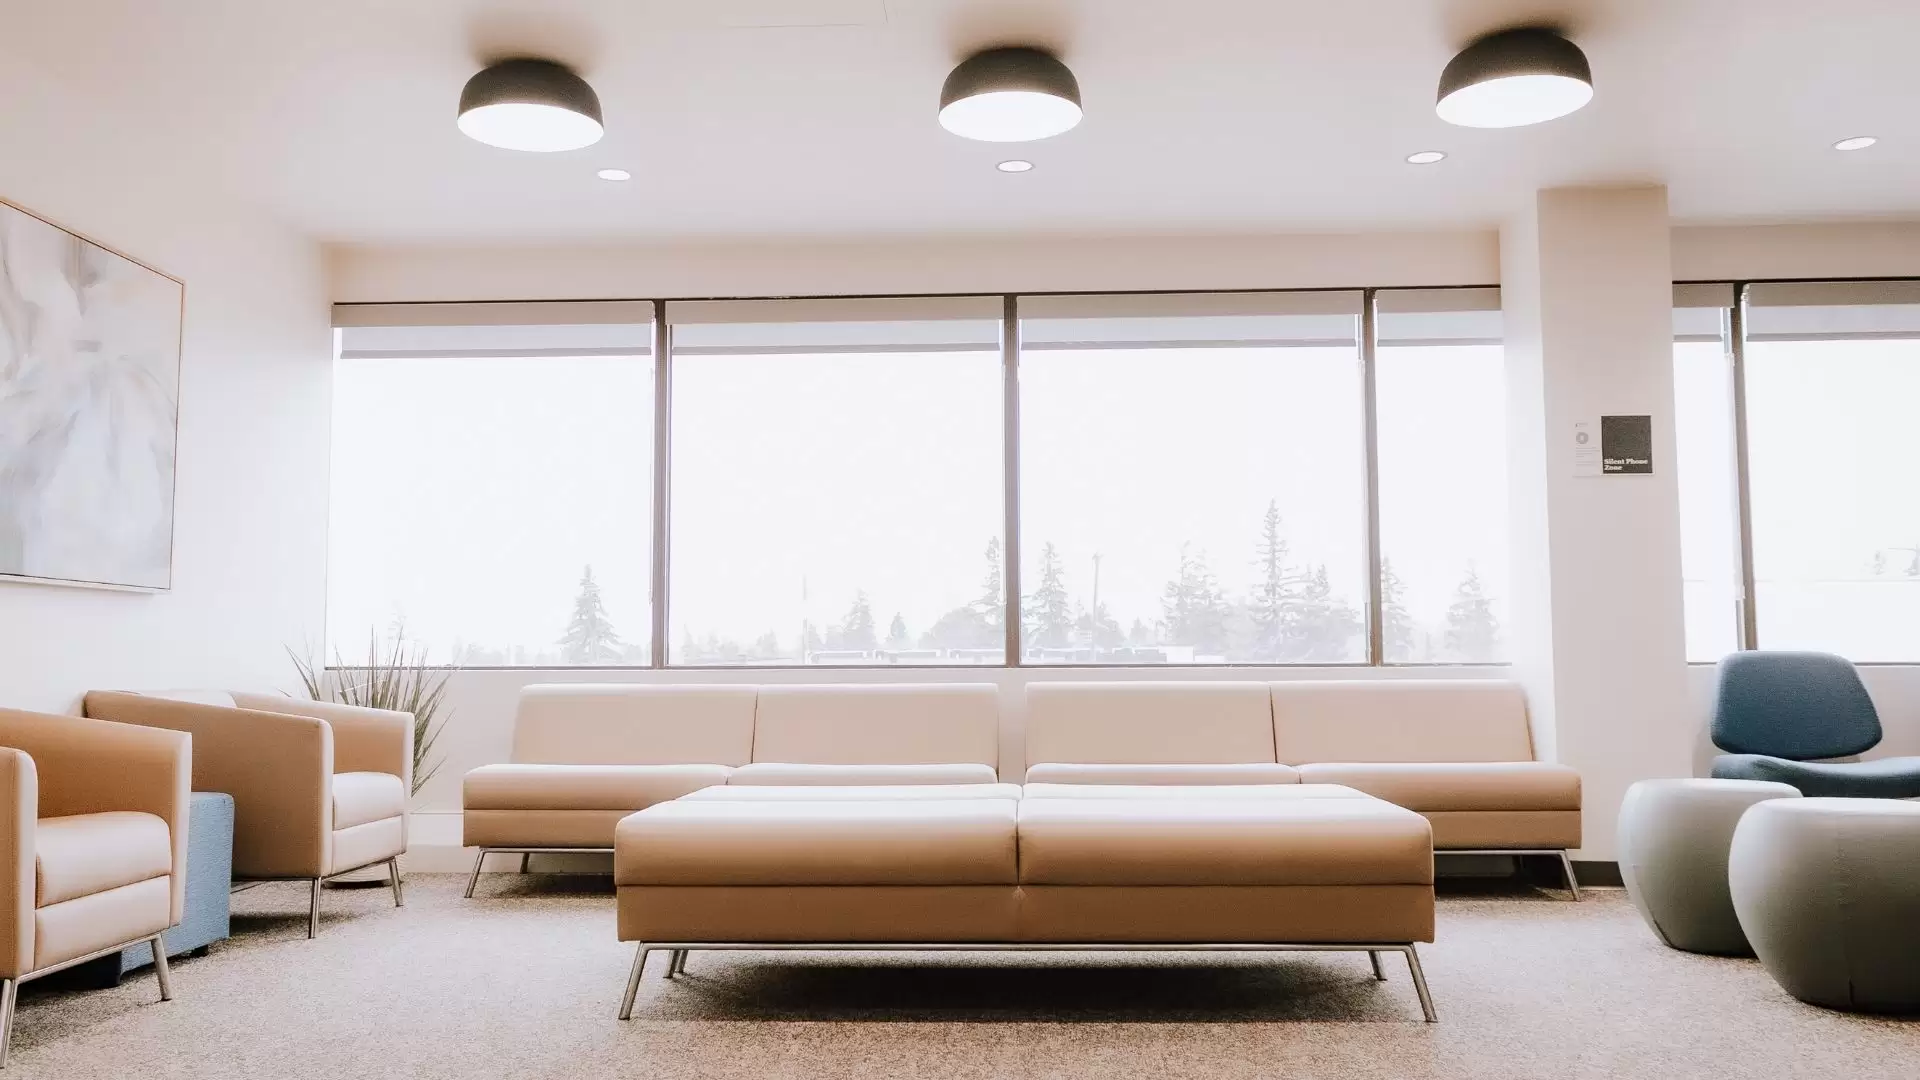 SACE reception waiting room with various neutral chairs and seating against a windowed wall. Neutral artwork is hung on the wall and three large light fixtures and four smaller recessed lights line the ceiling.